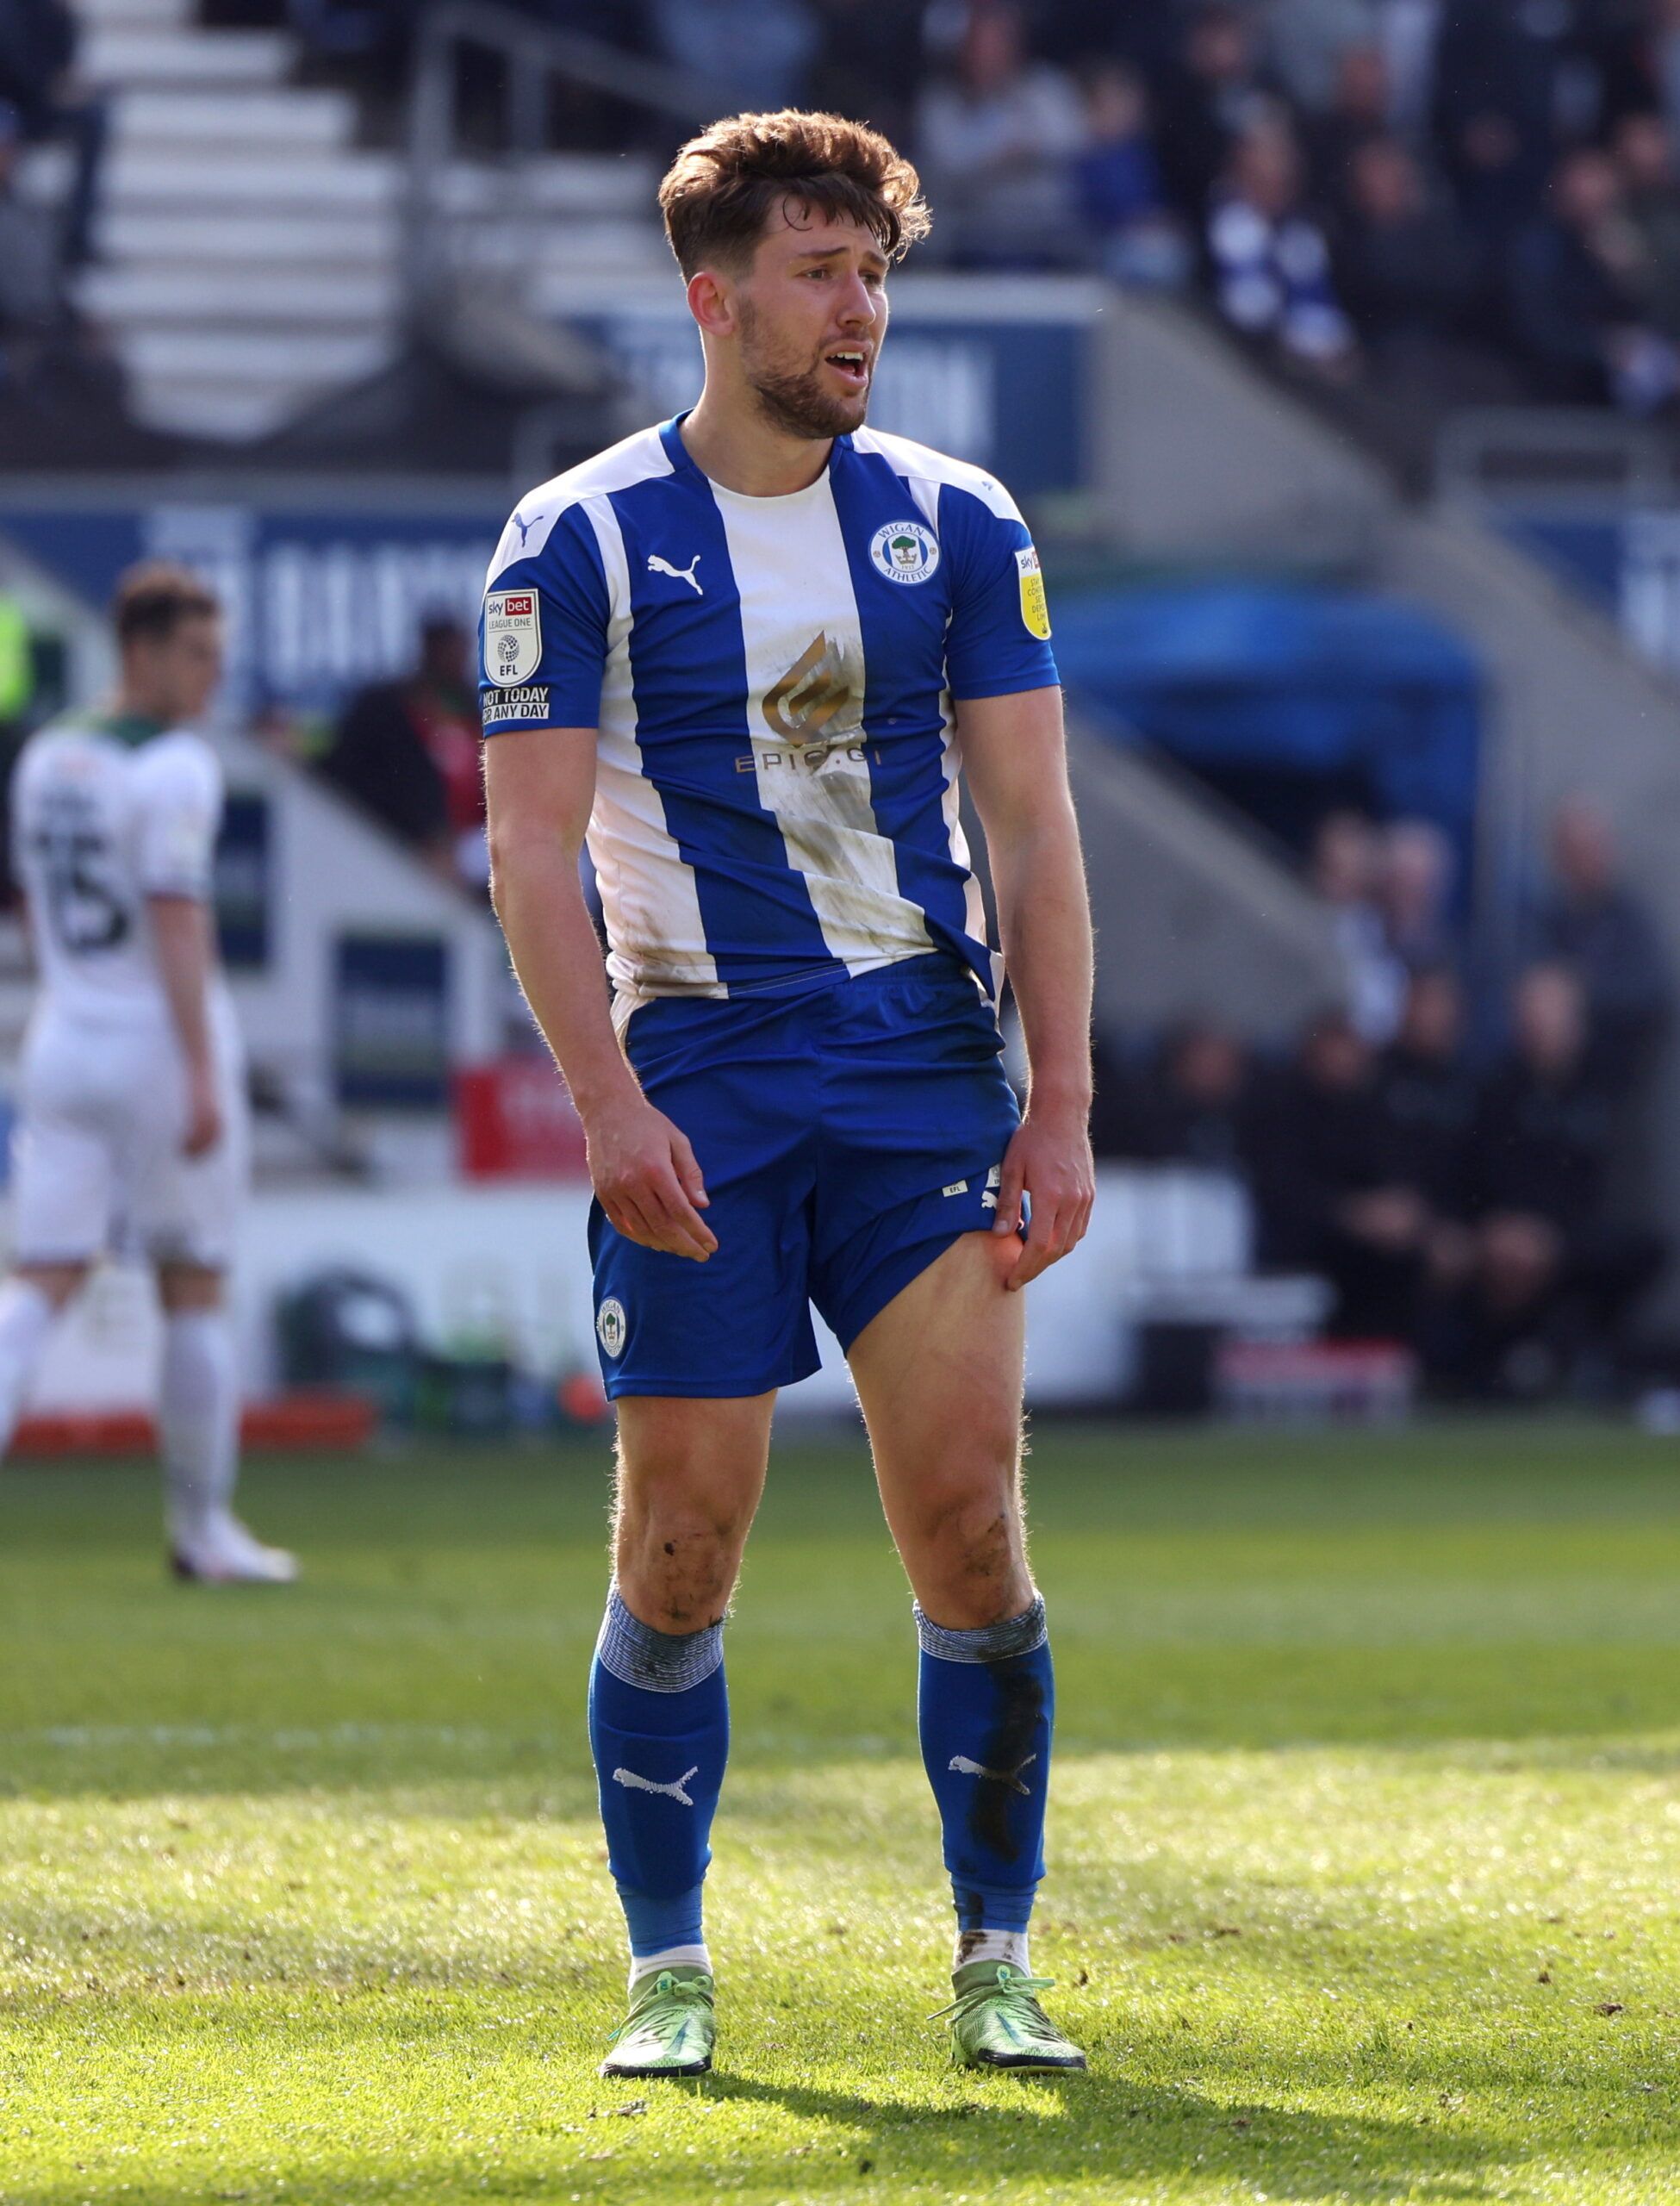 Soccer Football - League One - Wigan Athletic v Plymouth Argyle - DW Stadium, Wigan, Britain - April 23, 2022 Wigan Athletic's Callum Lang reacts    Action Images/John Clifton  EDITORIAL USE ONLY. No use with unauthorized audio, video, data, fixture lists, club/league logos or 